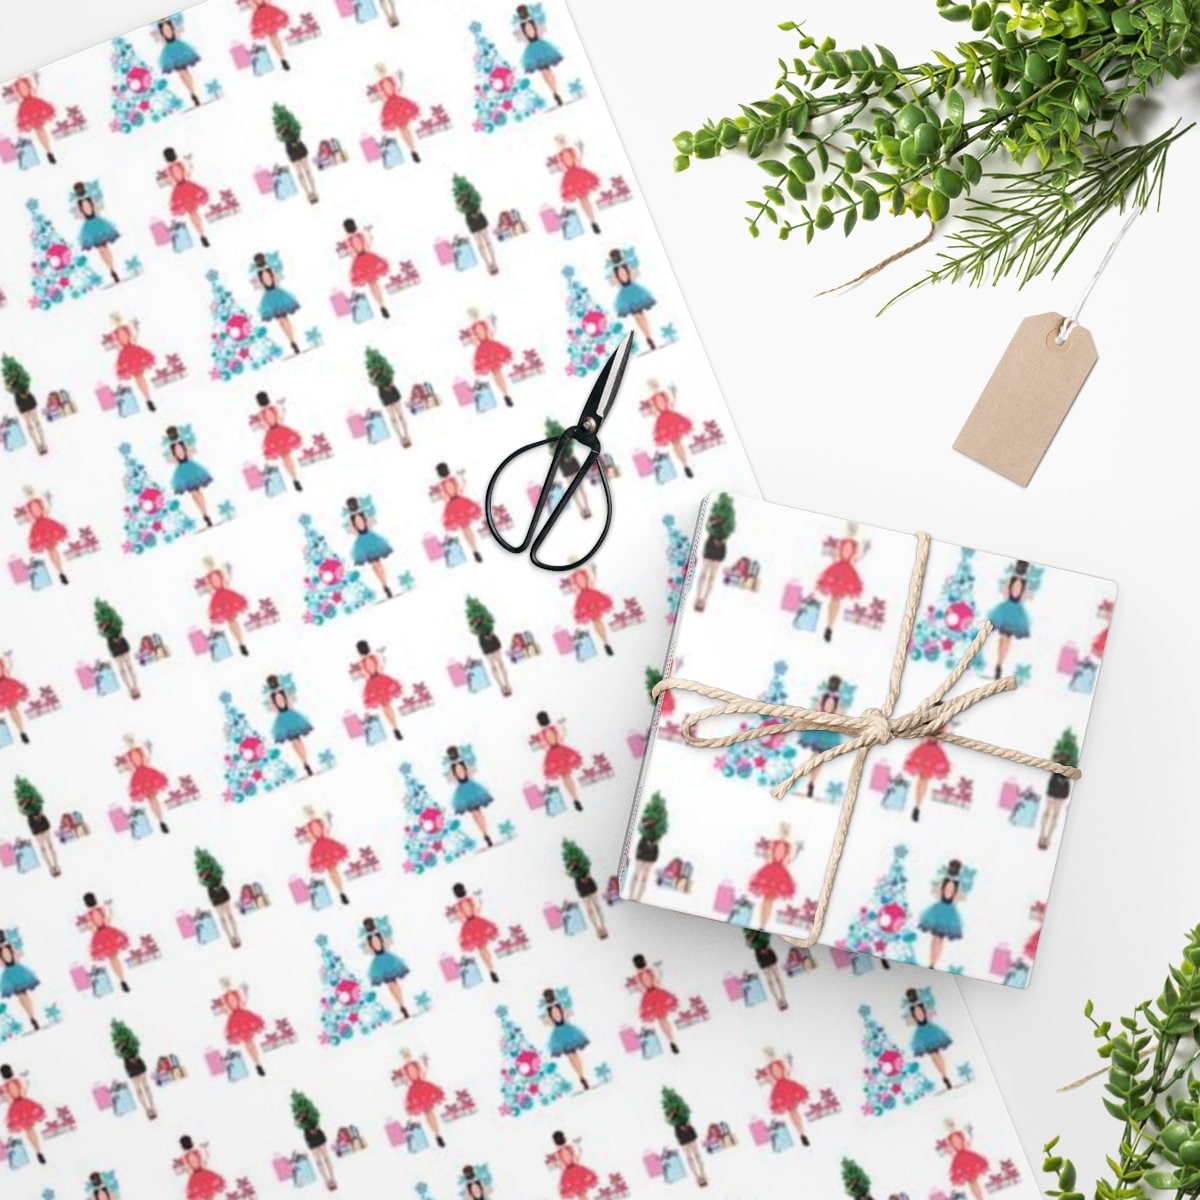 Luxury Brand Wrapping Paper, Luxury Wrapping Paper, Christmas Wrapping  Paper, Birthday Wrapping Paper, Gift Wrap, Holiday Wrapping Paper